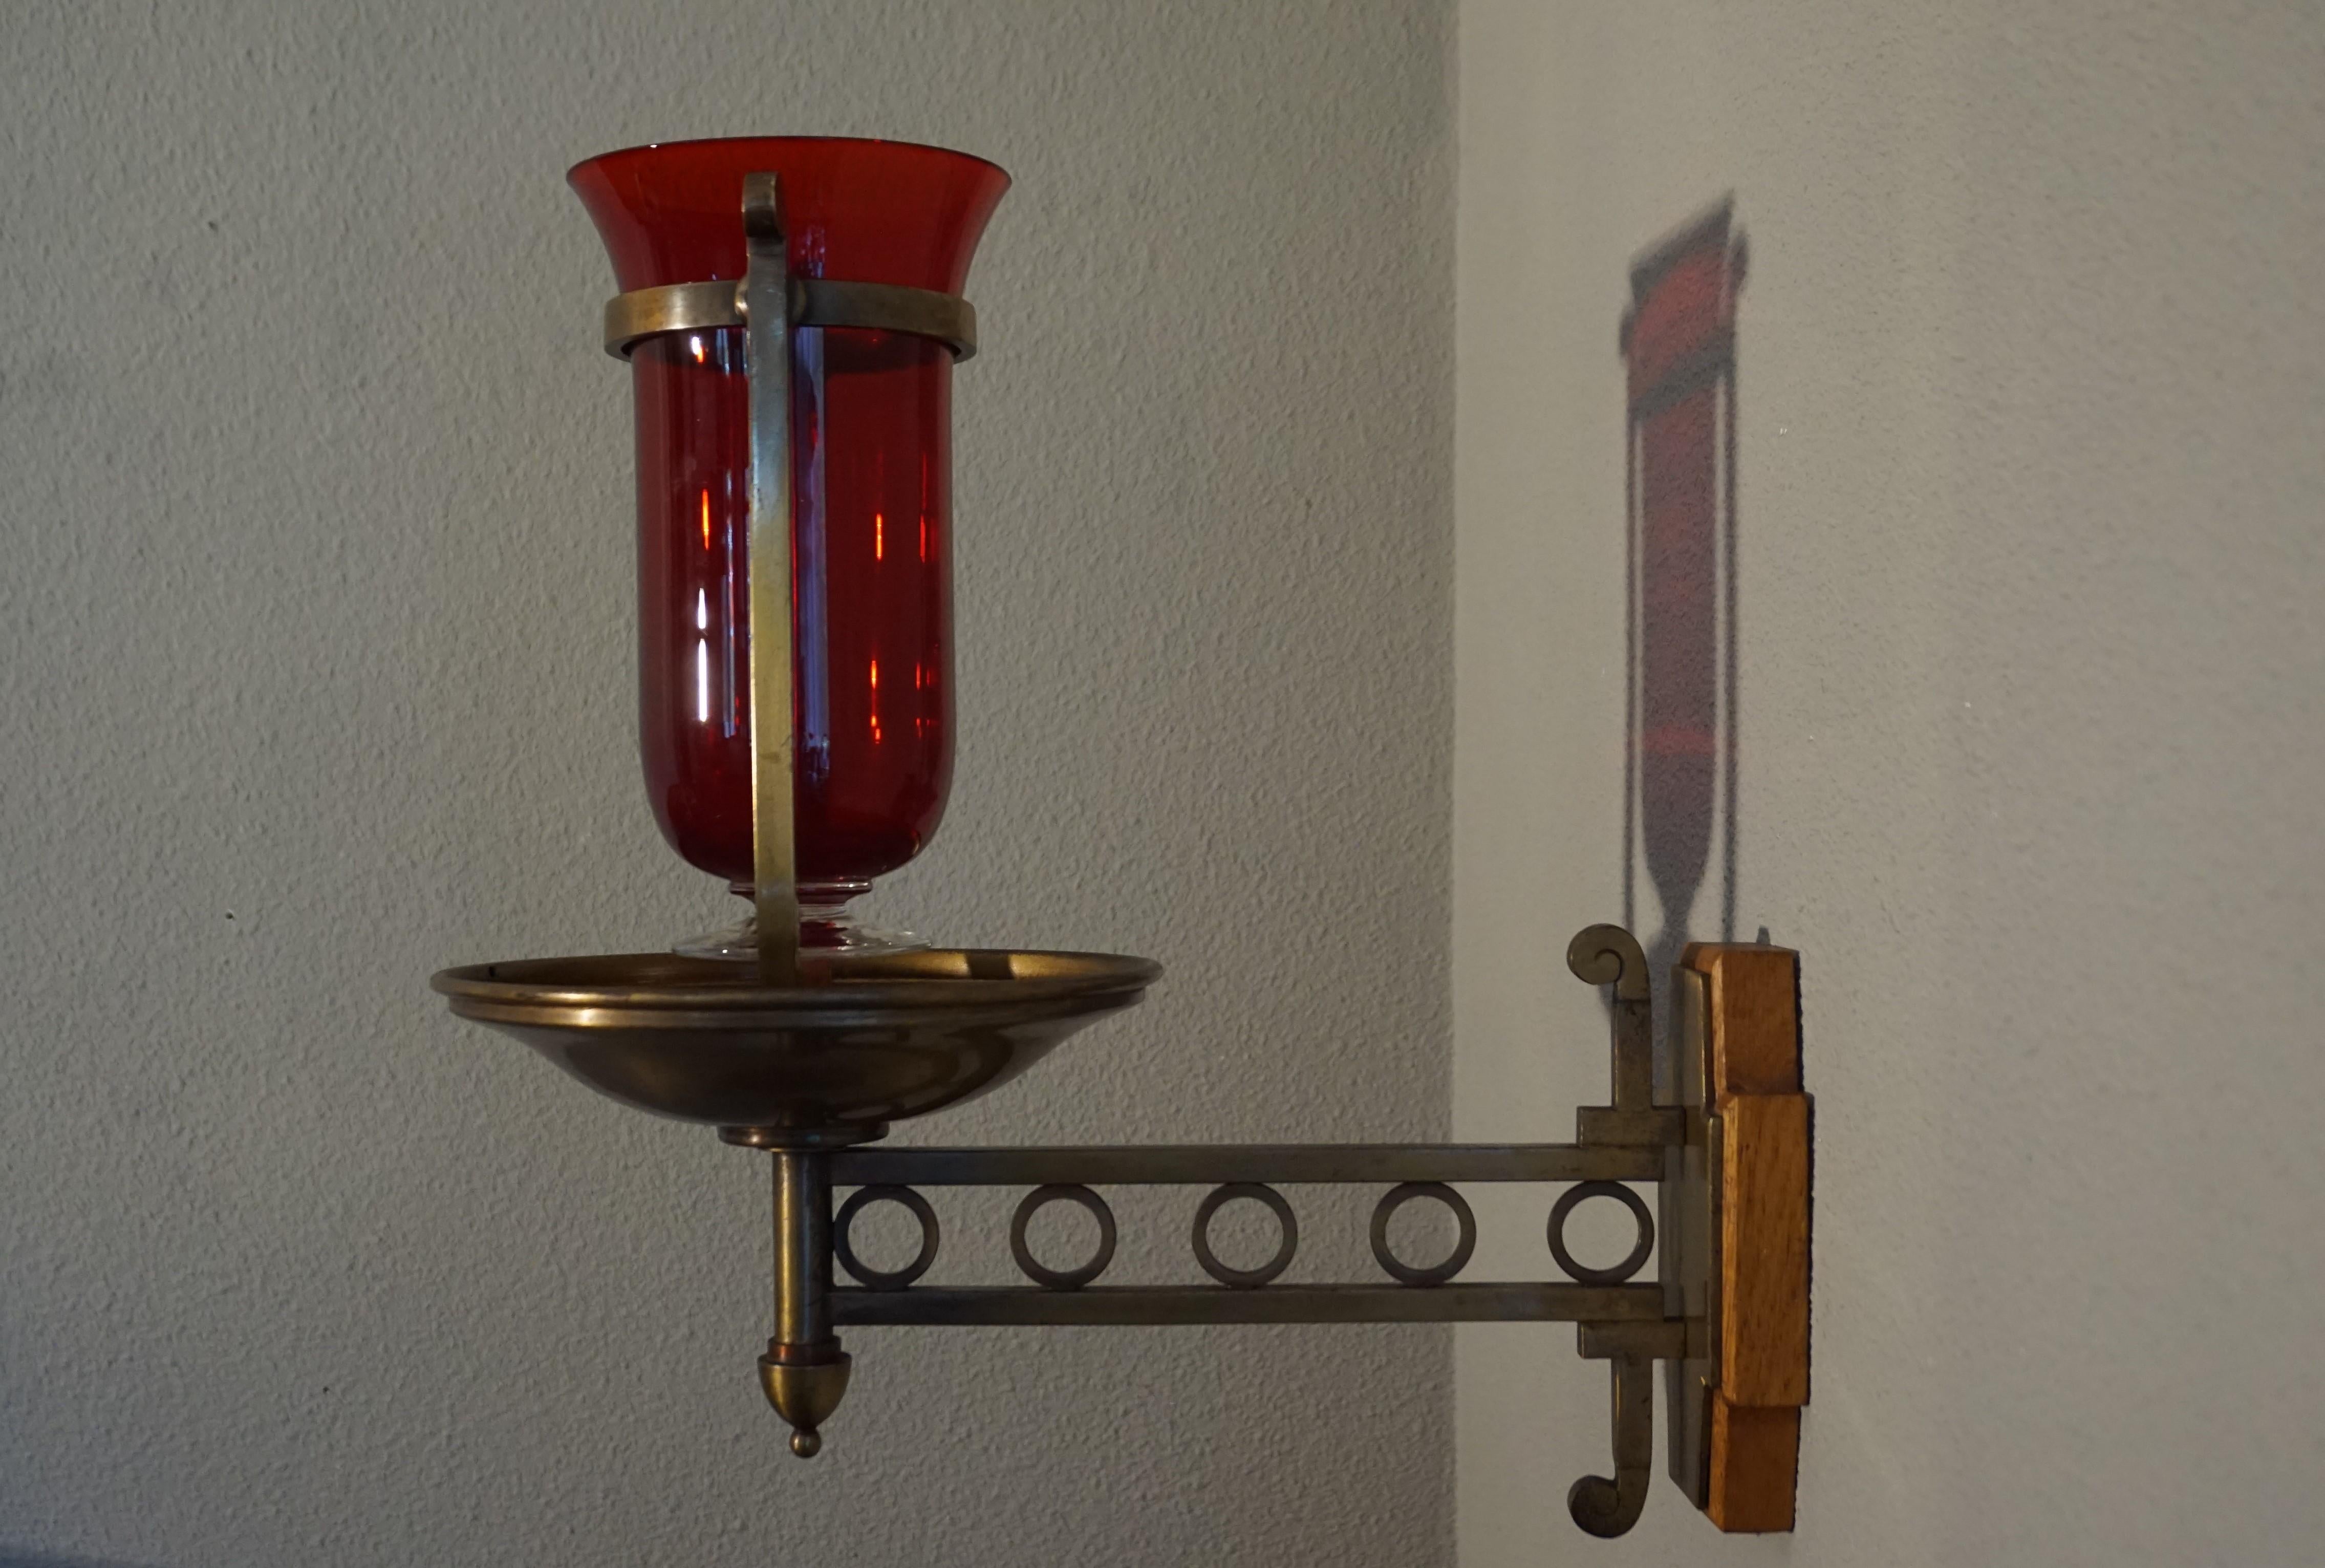 Dutch Handcrafted Brass with Cranberry Glass Vessel Art Deco Sanctuary Wall Lamp, 1920